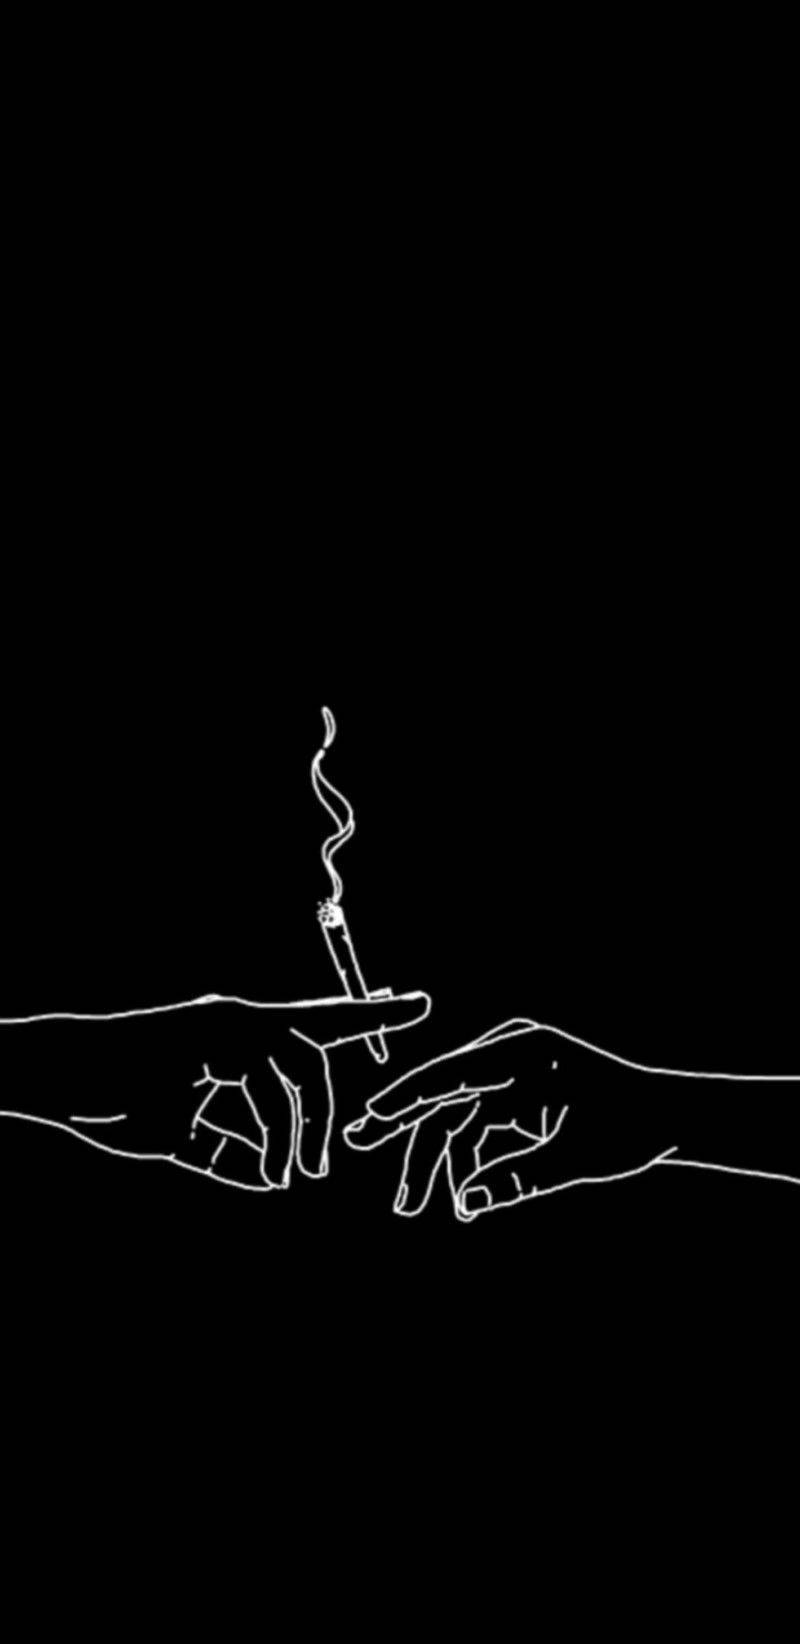 Cute Black And White Aesthetic Sharing Cigarette Wallpaper